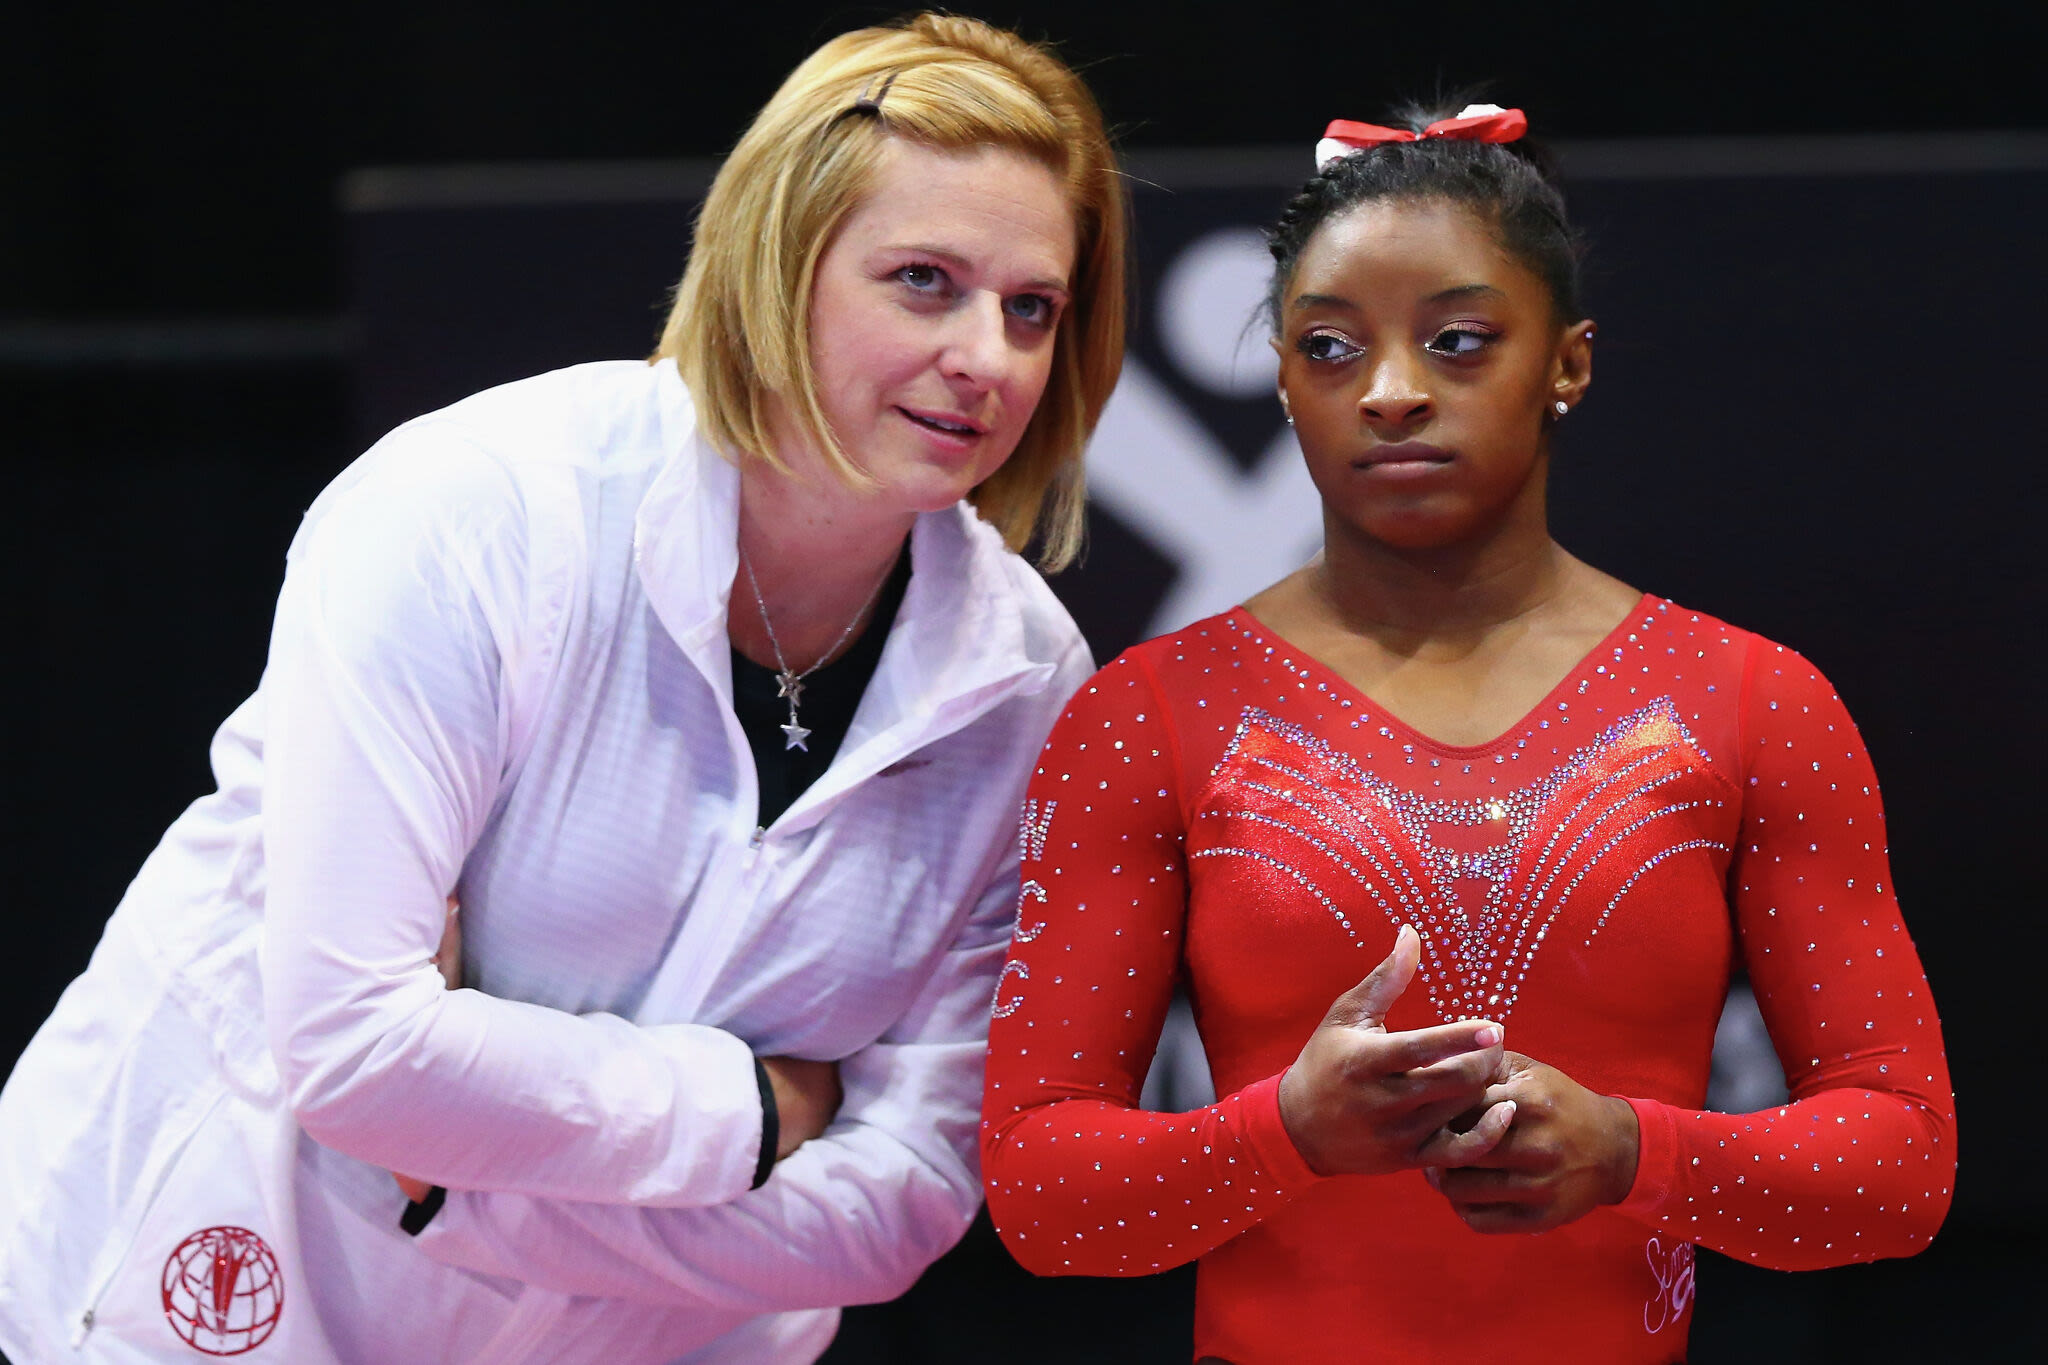 CT resident who coached Simone Biles among those behind potential pro gymnastics league